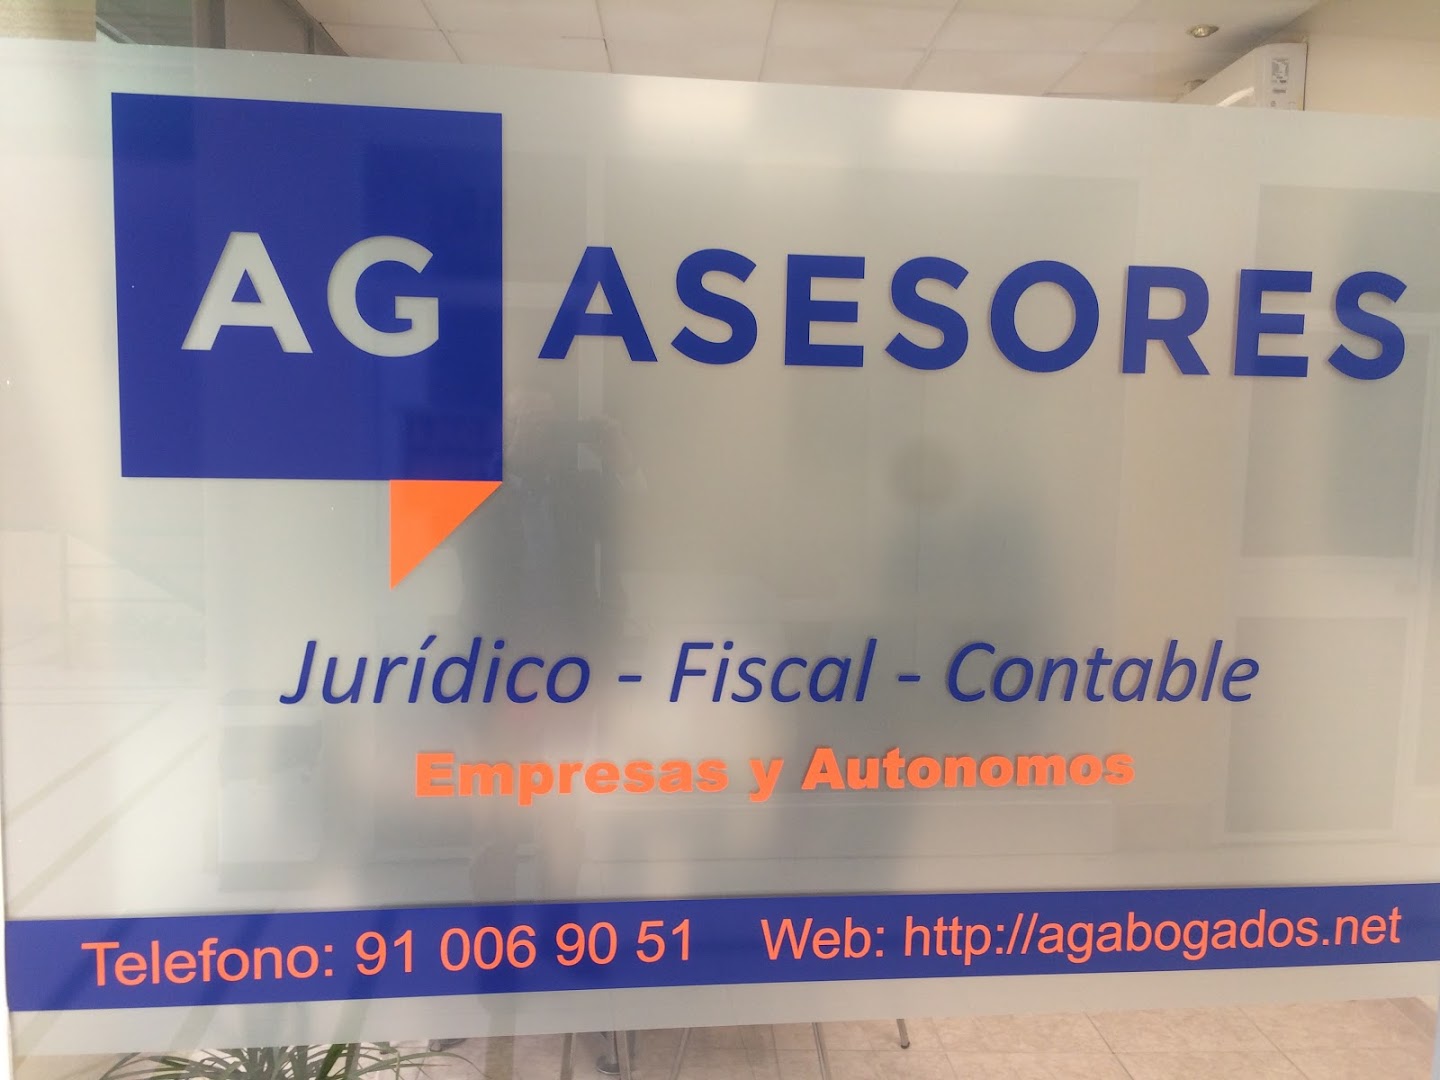 AG ASESORES